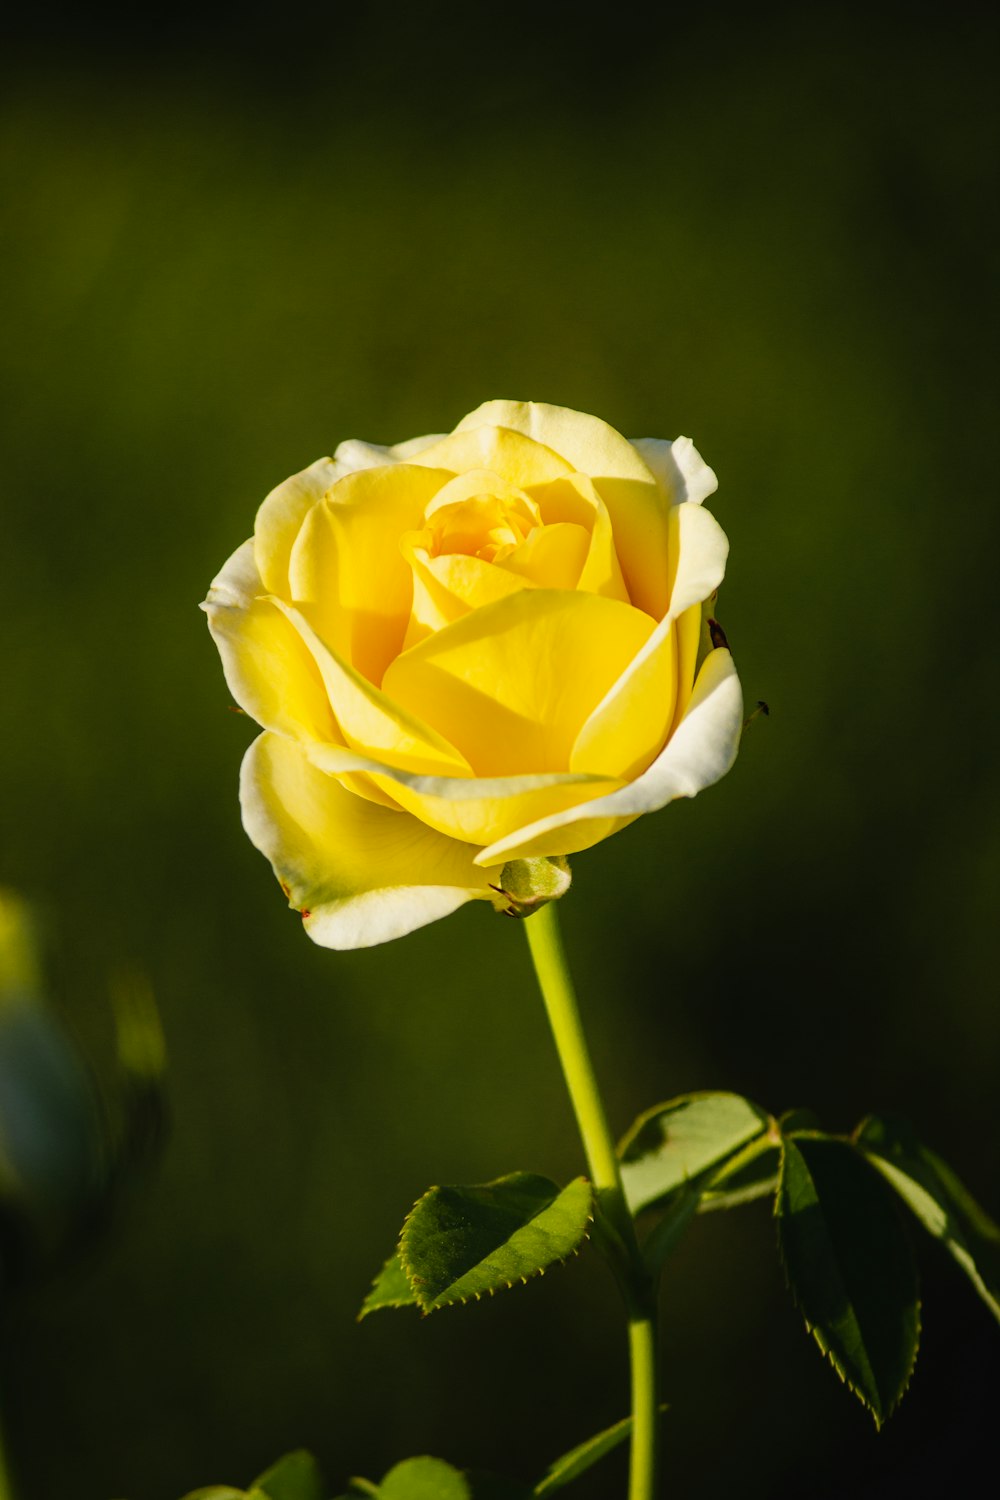 350+ Yellow Rose Pictures [HD] | Download Free Images on Unsplash